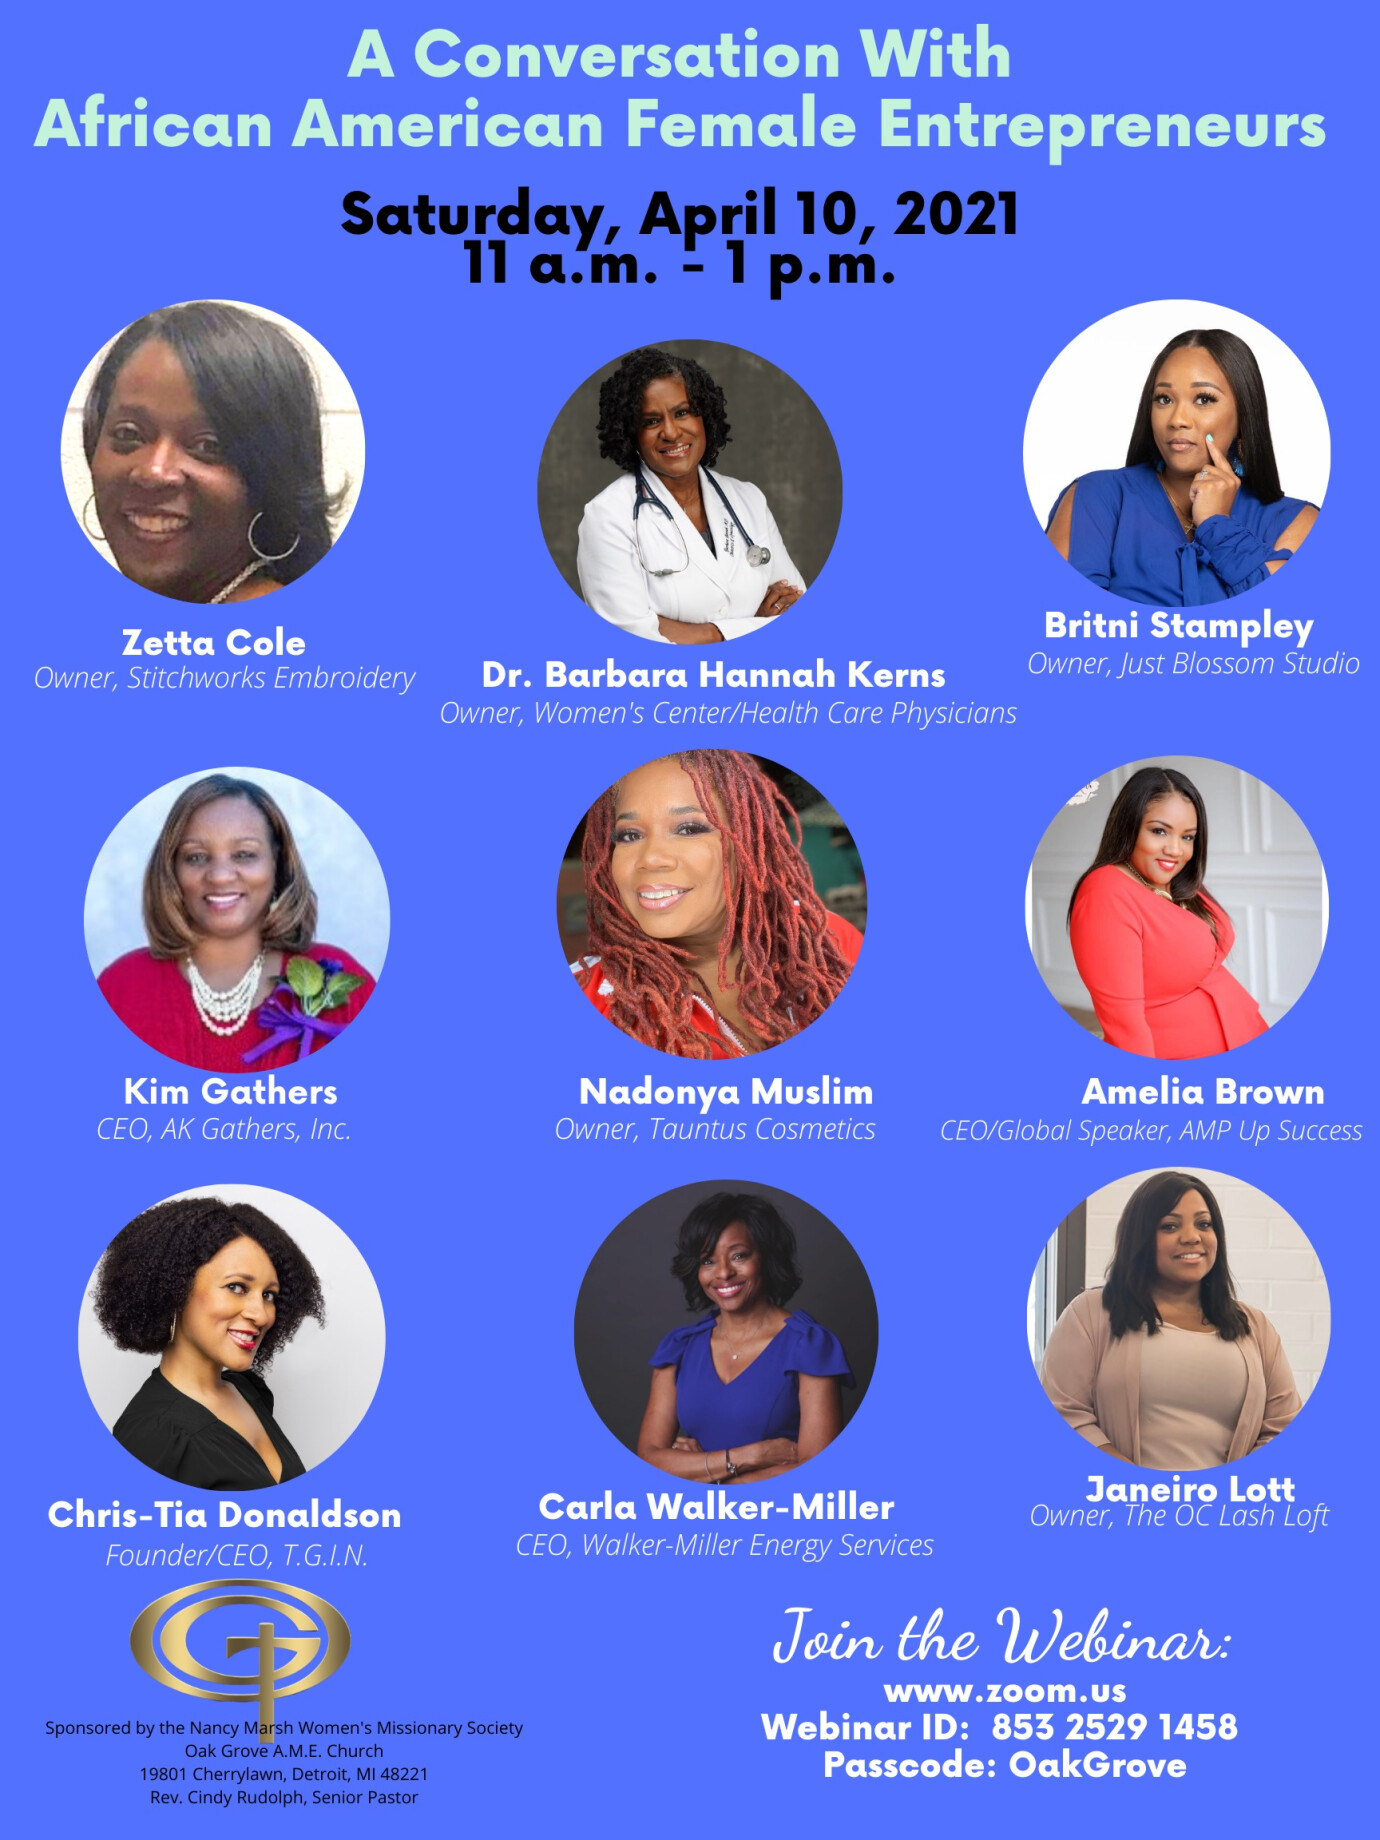 A Virtual Conversation with African American Female Entrepreneurs